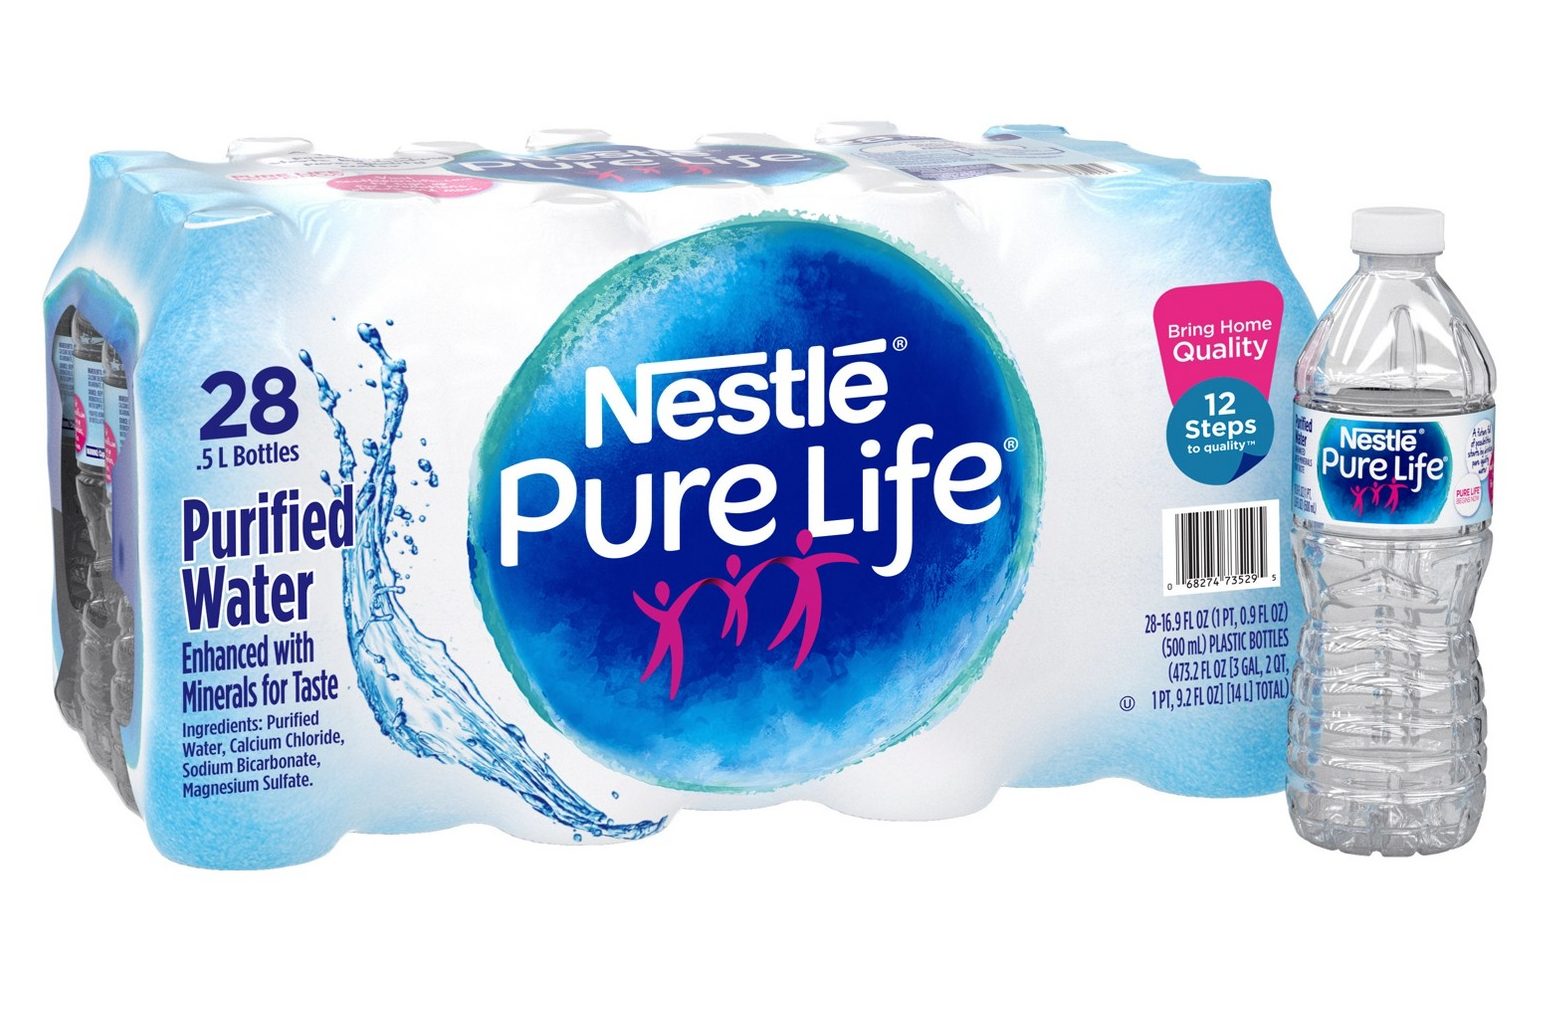 Sweet Deals on Nestle Pure Life Bottled Water at Target!